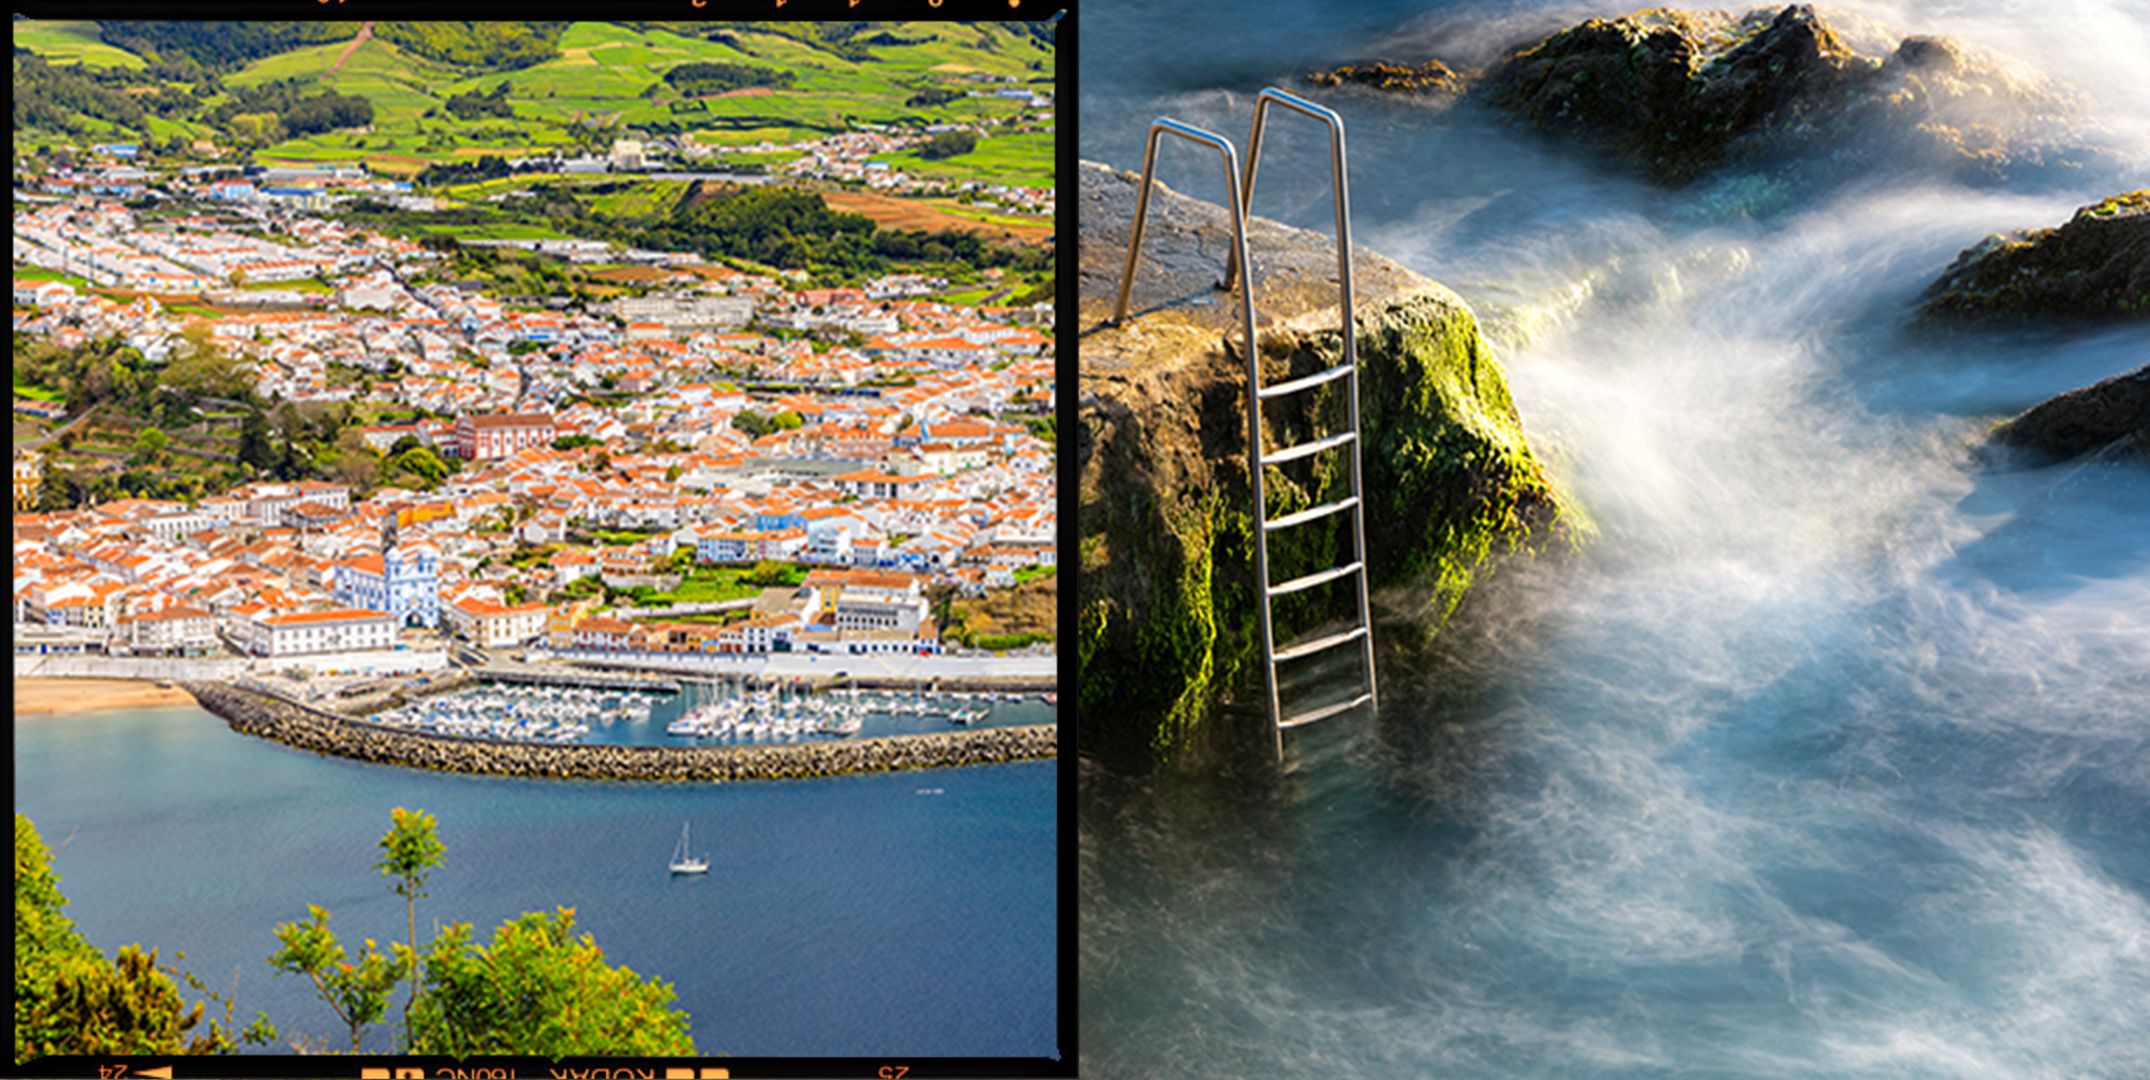 Terceira Island, the Azores travel guide